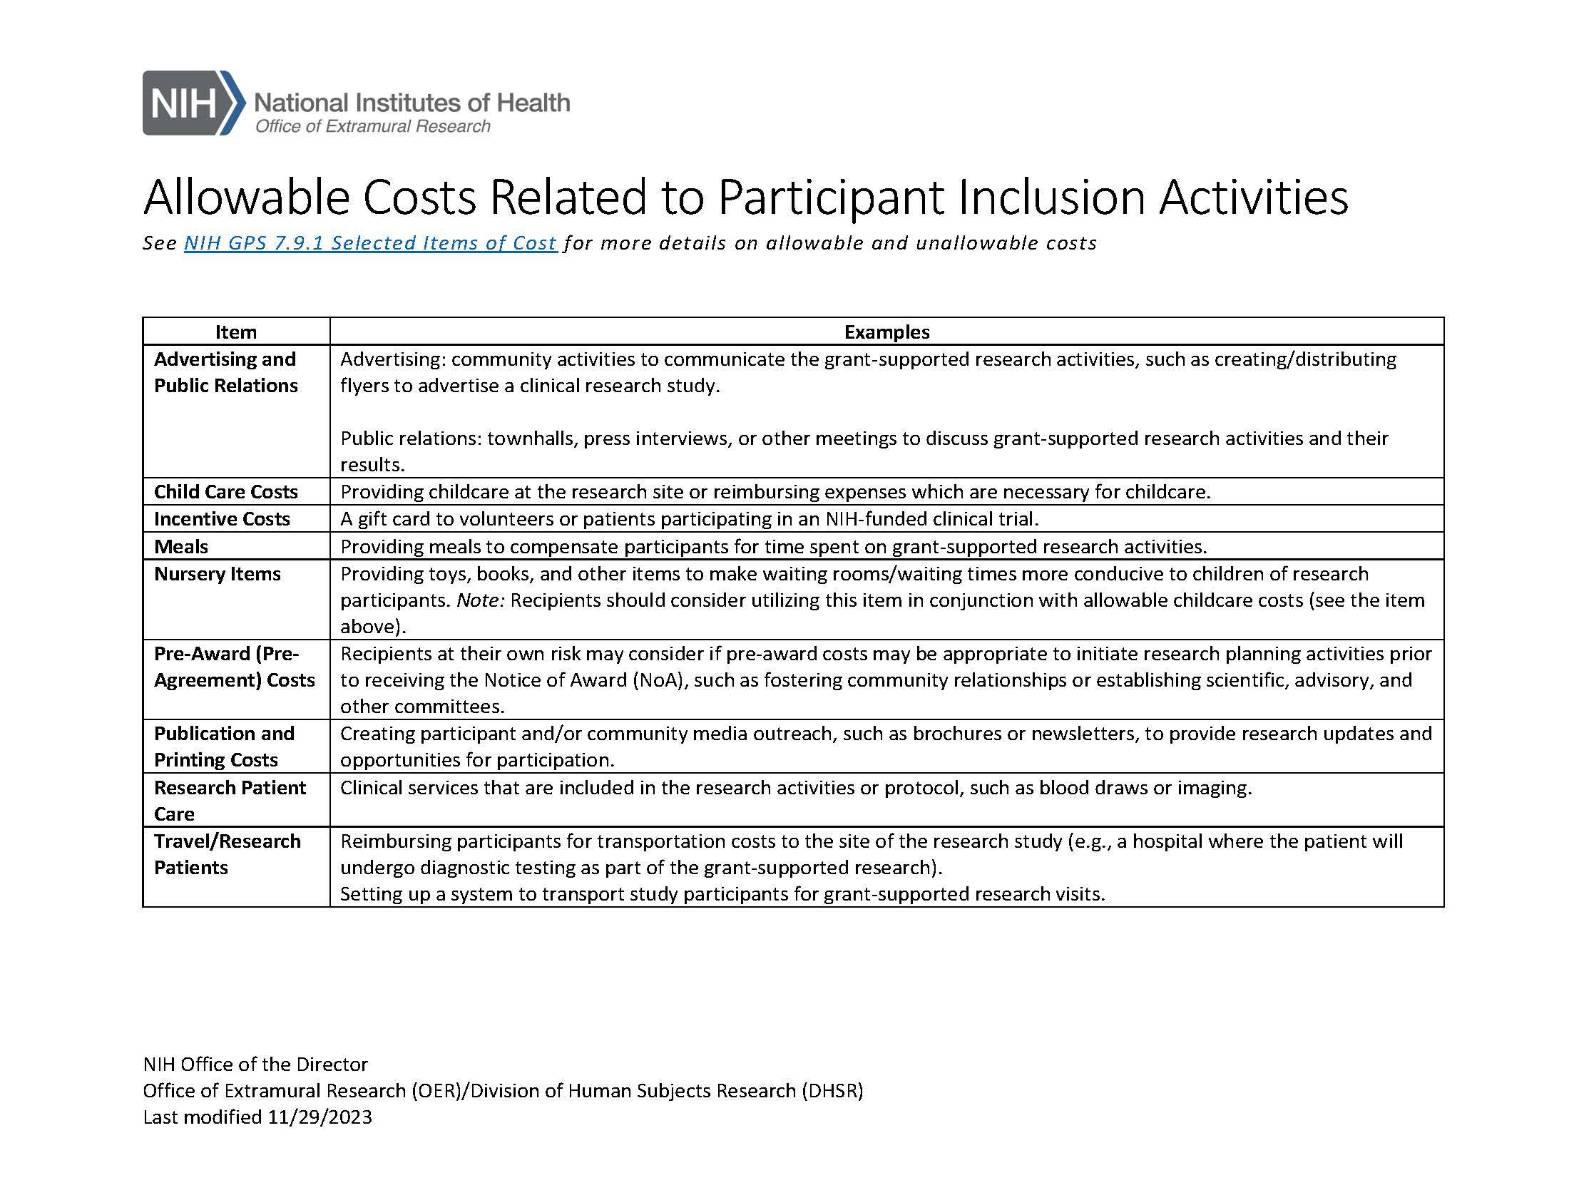 Allowable Costs Related to Participant Inclusion Activities